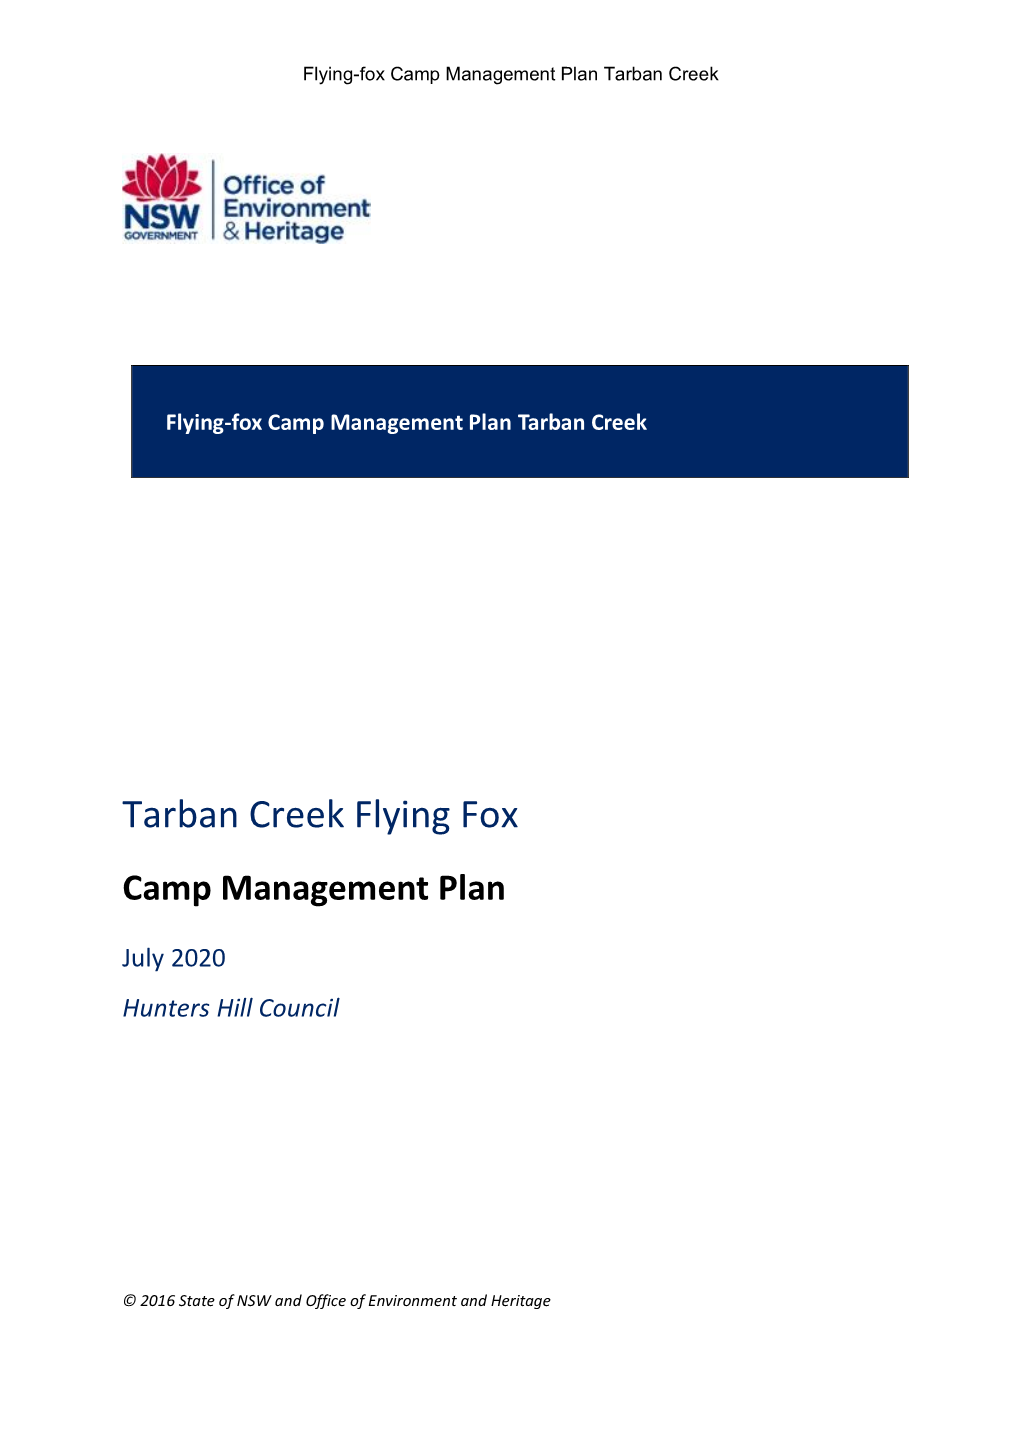 Flying-Fox Camp Management Plan Template 2016